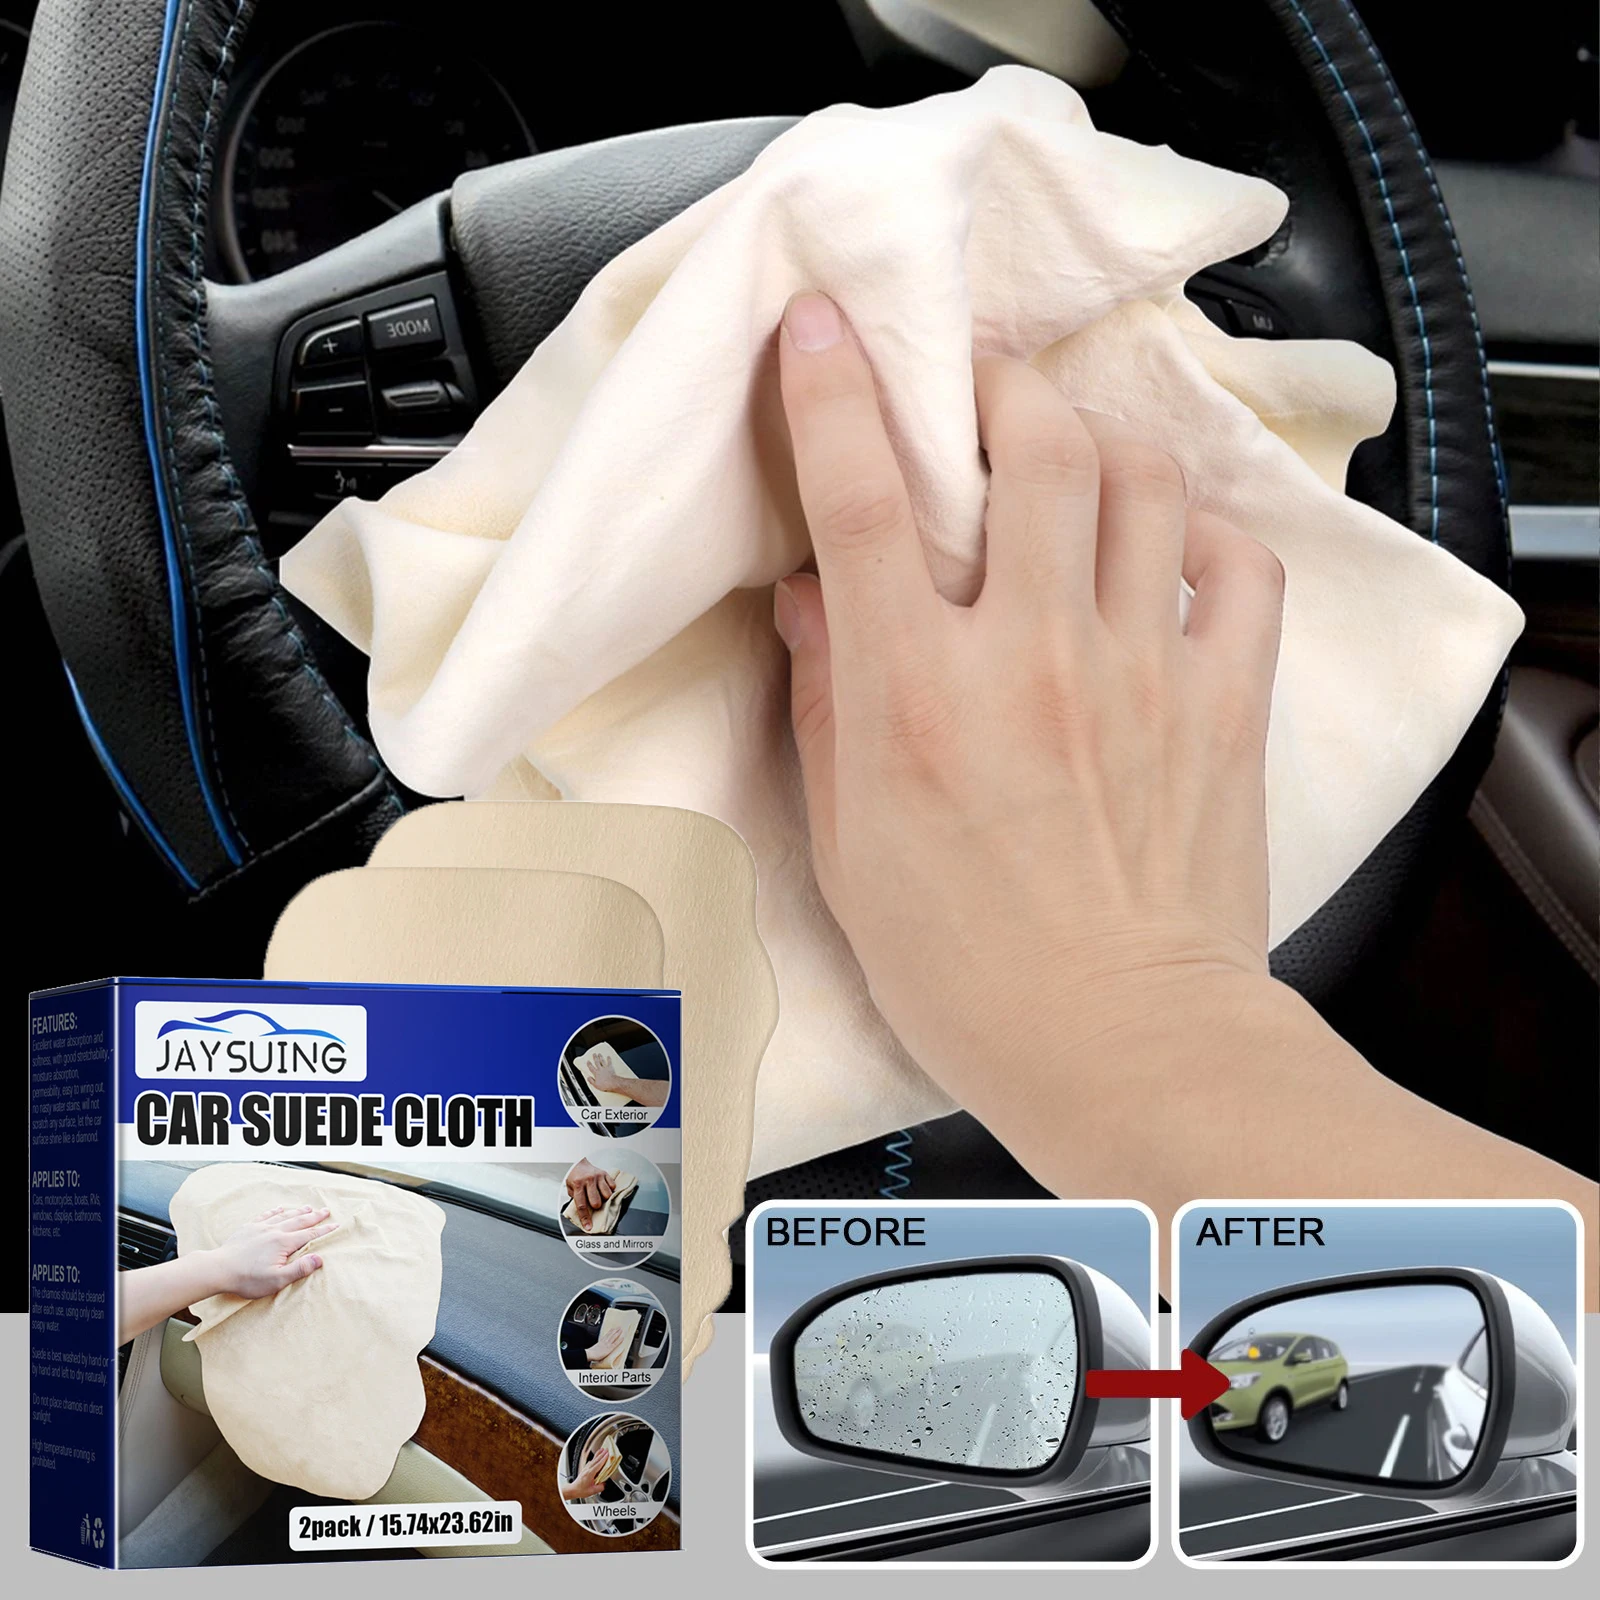 

Car Suede Cloth Multifunction Super Absorbent Cleaning Protection Wet Towel Lint Freedust Cloth Drying Cleaning Free Shipping